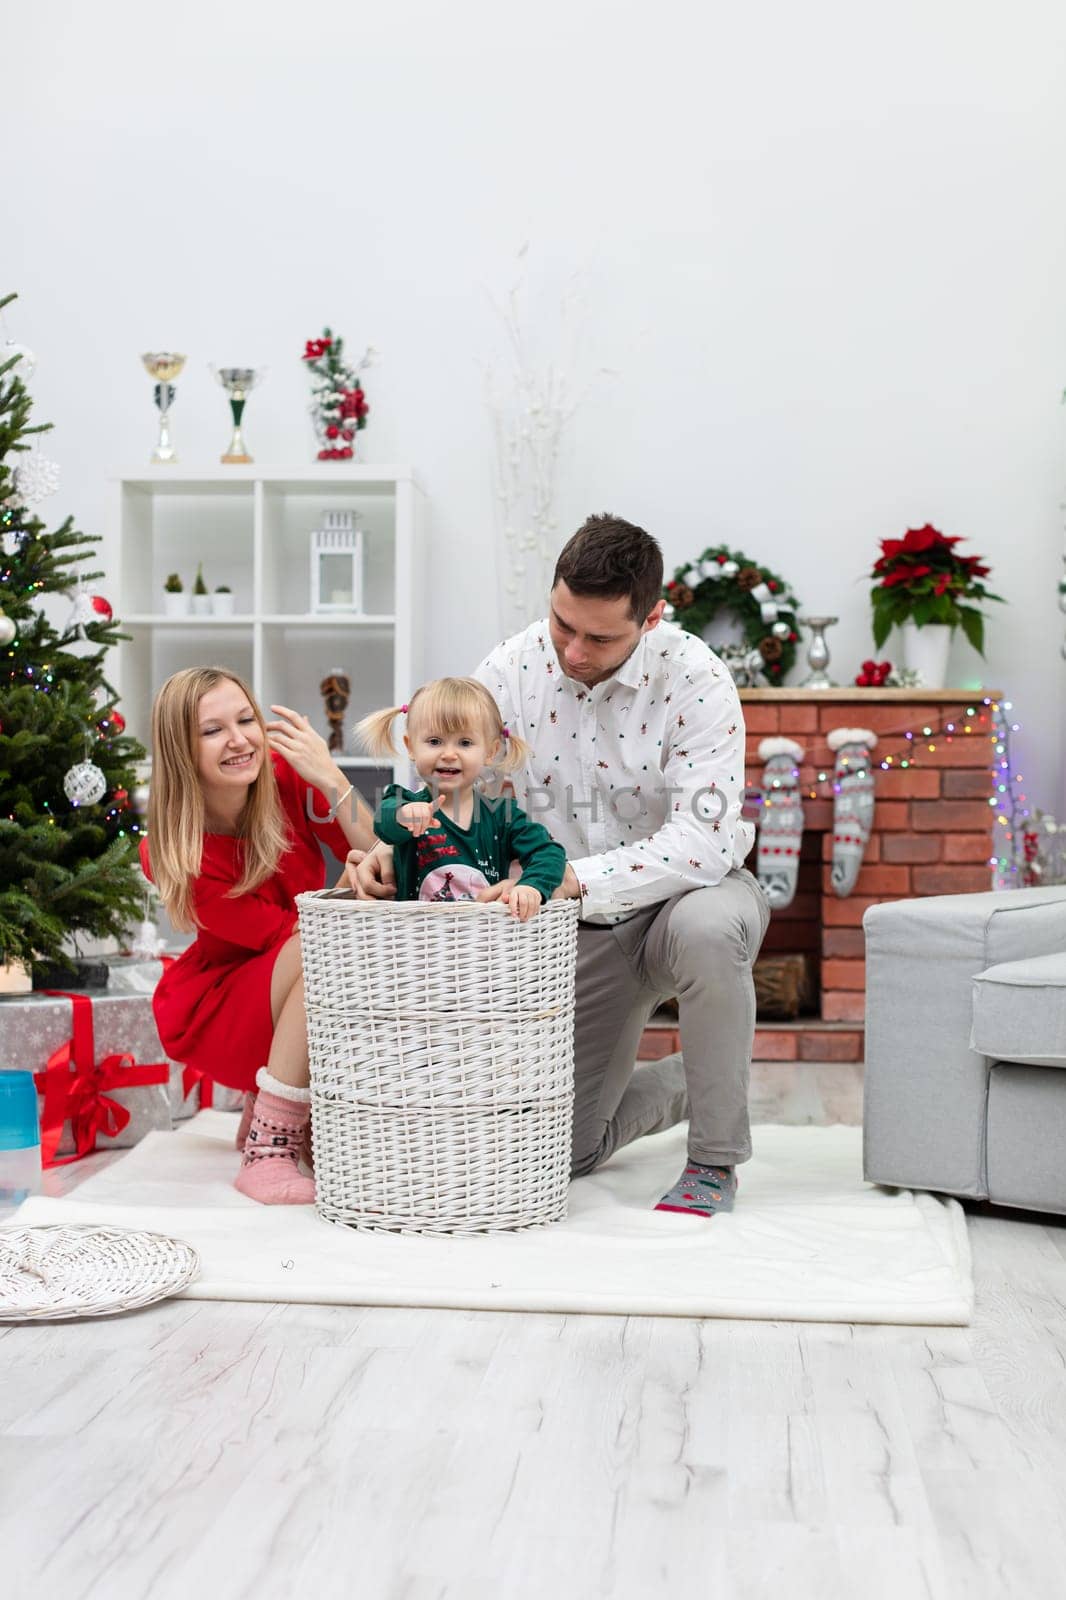 Mom and dad are playing with their little daughter. The little girl has climbed into a large white wicker basket for fun. The family is smiling. In the background you can see a brick fireplace decorated with Christmas lights.